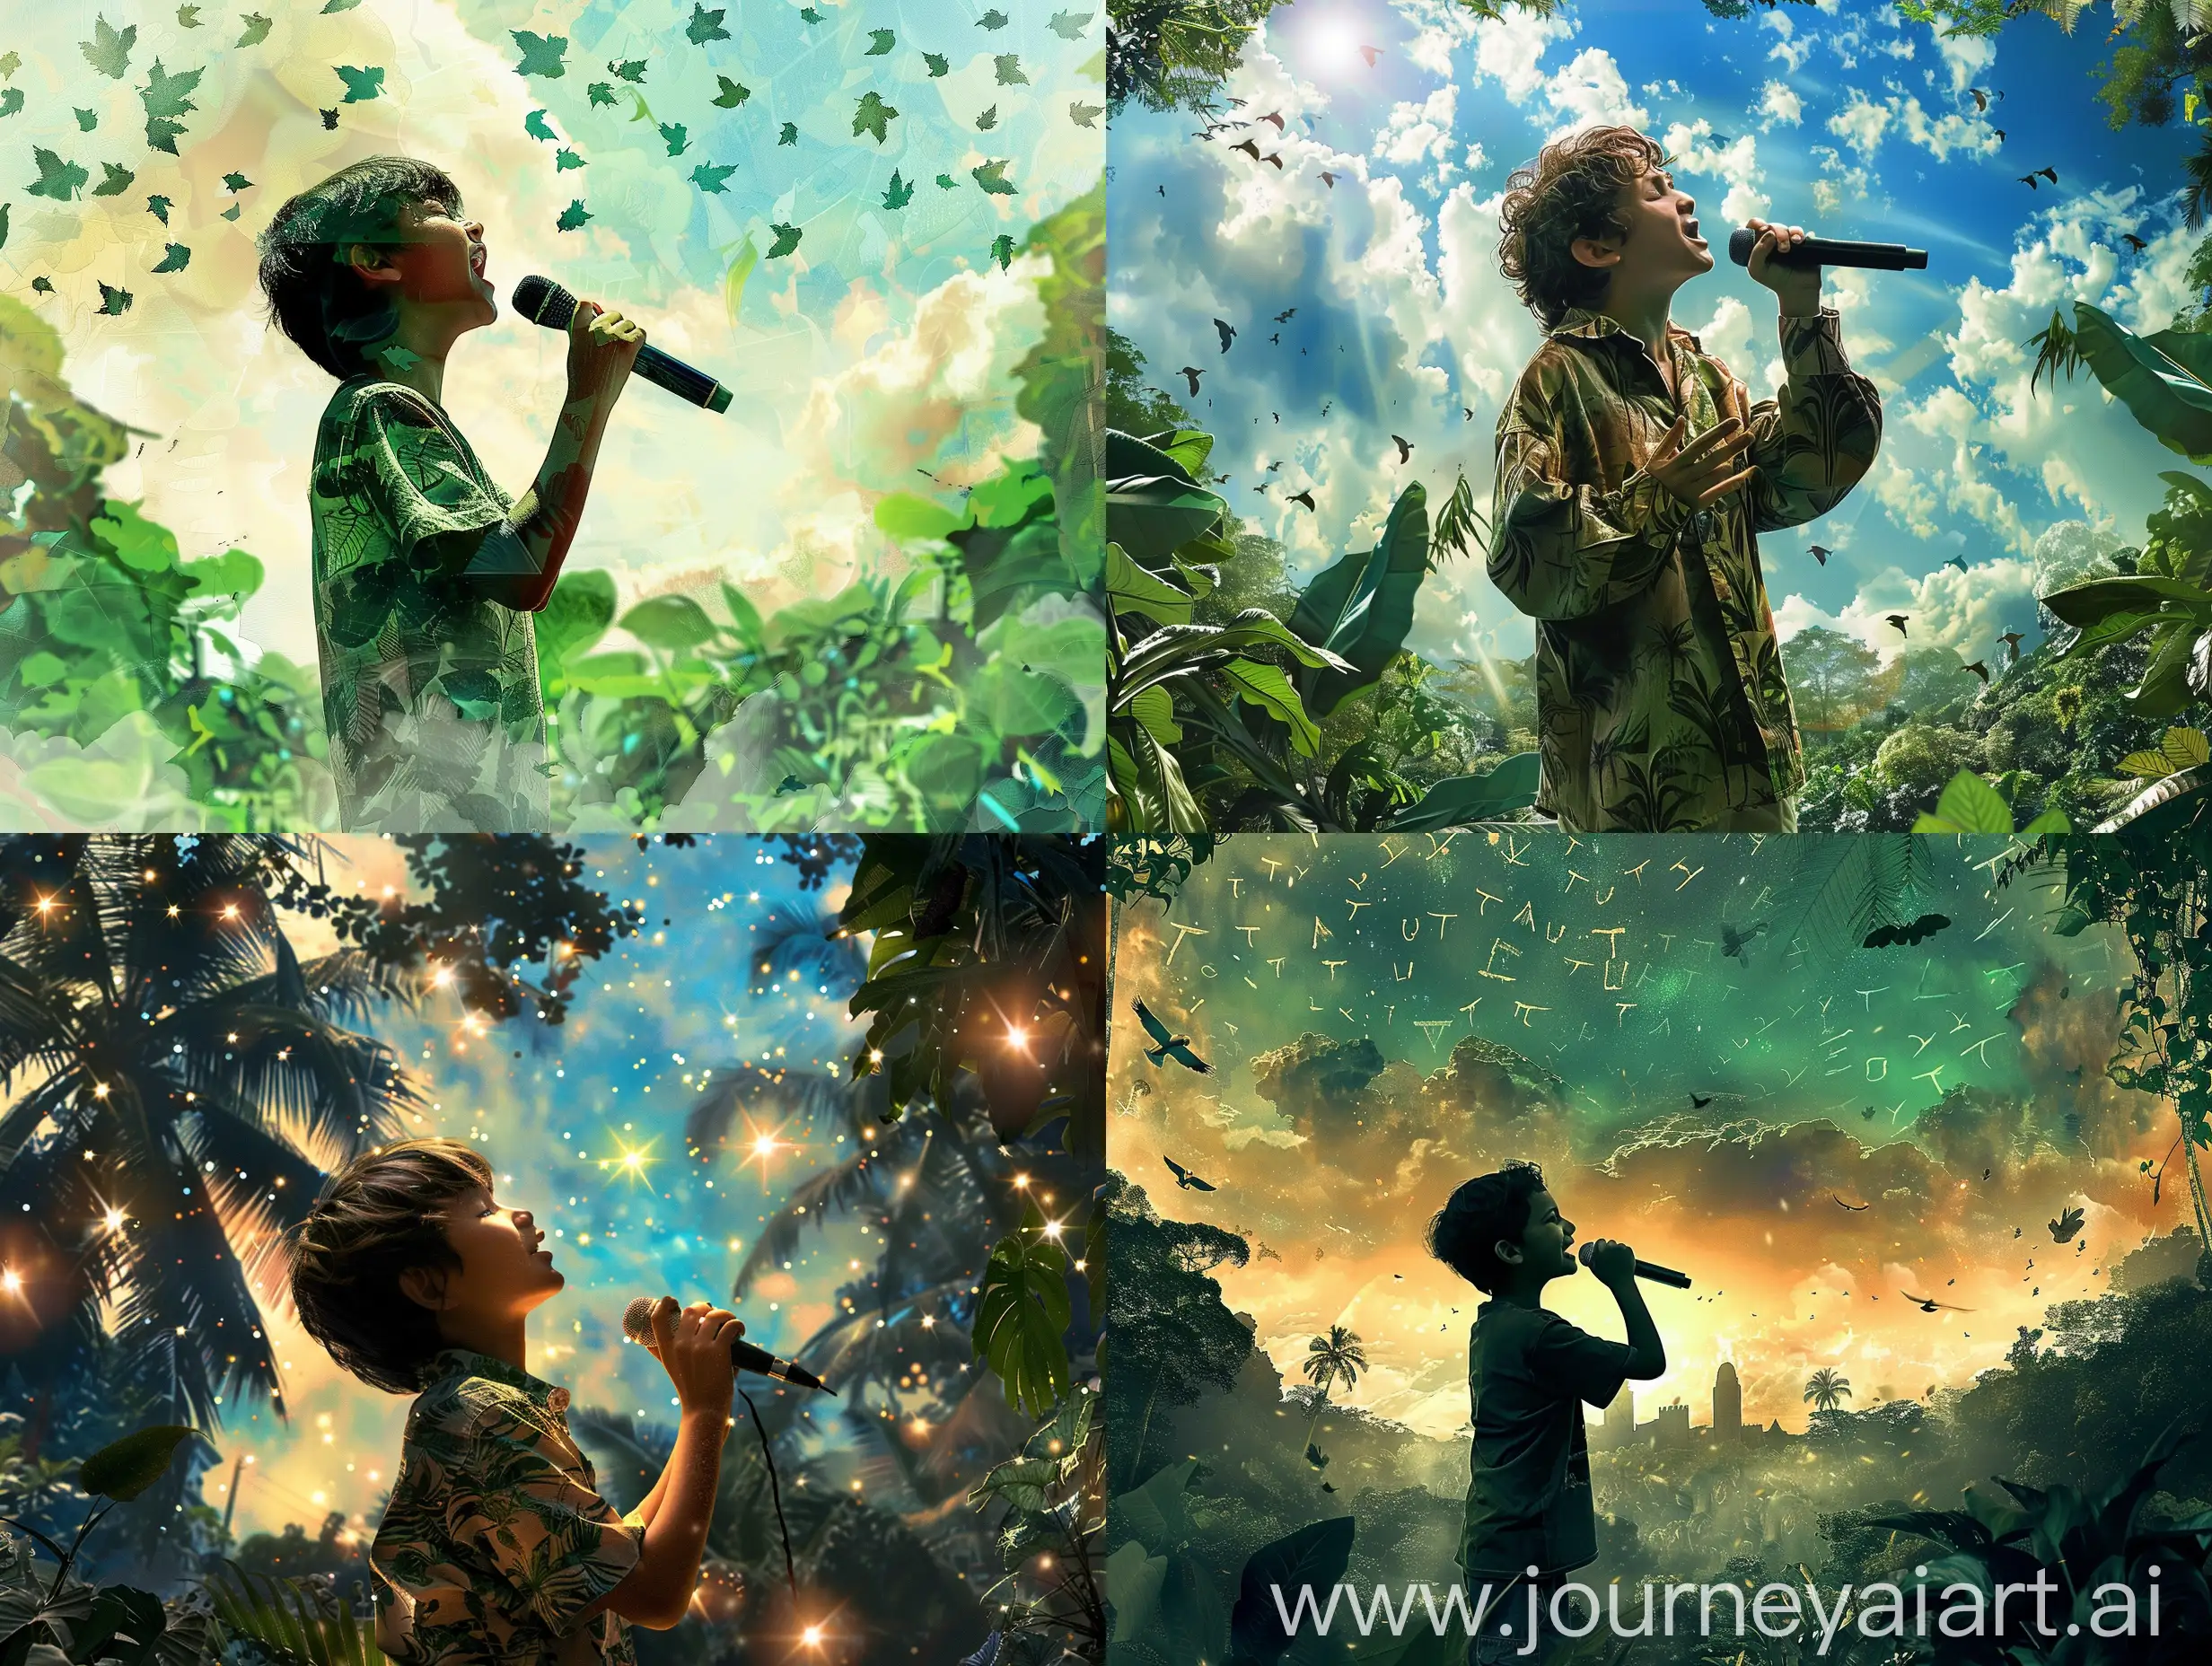 Boy-Singing-in-Jungle-with-University-Sky-Musical-Adventure-in-Lush-Wilderness